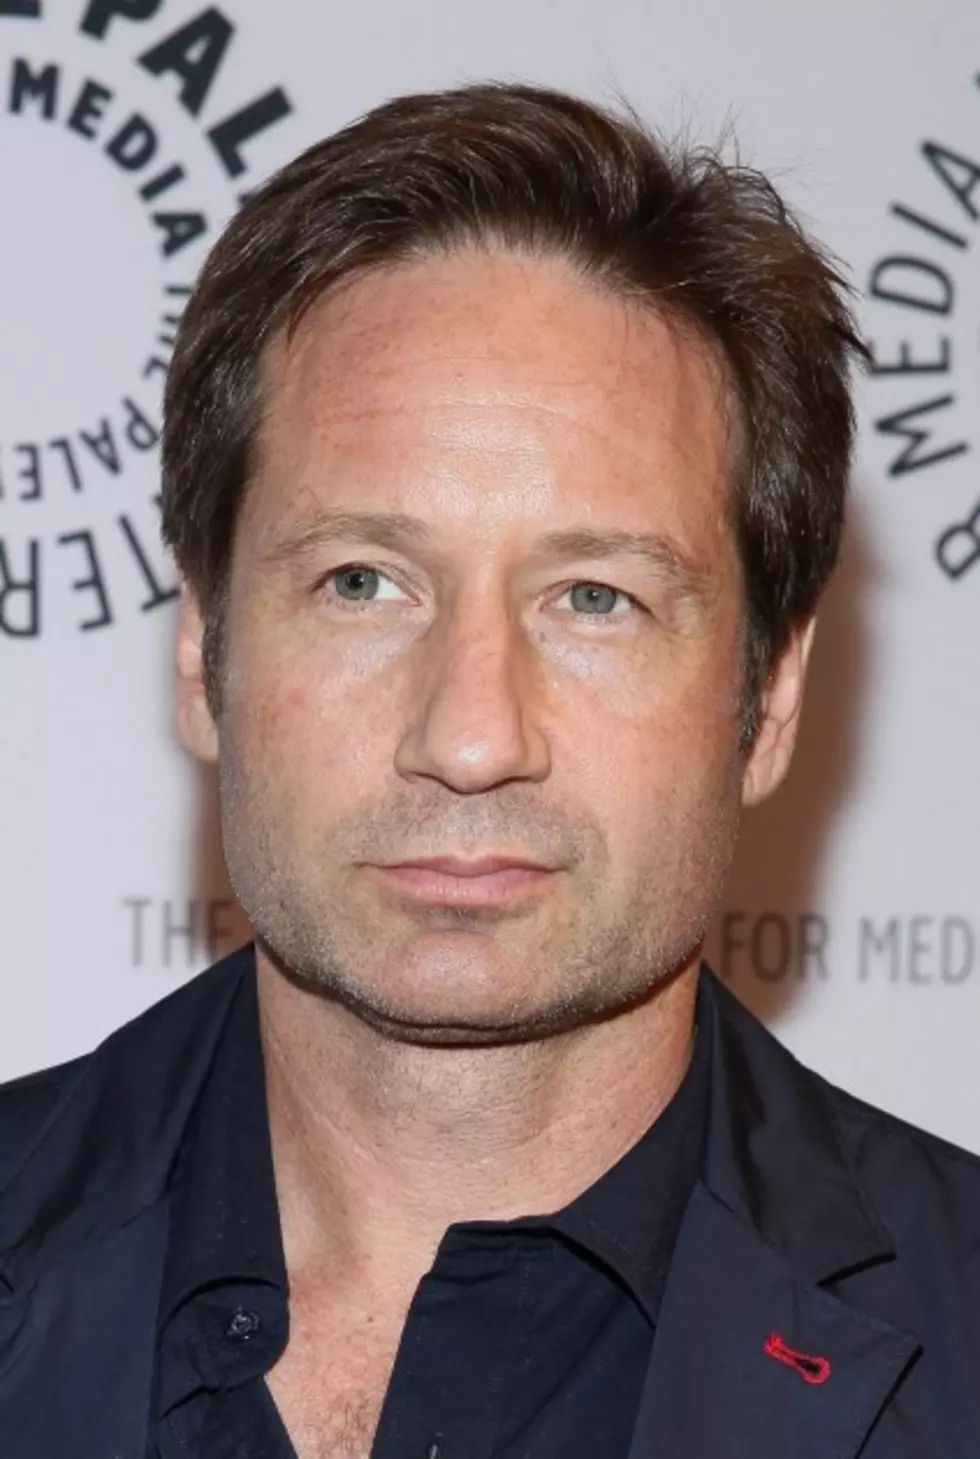 David Duchovny The Singer?! [VIDEO]